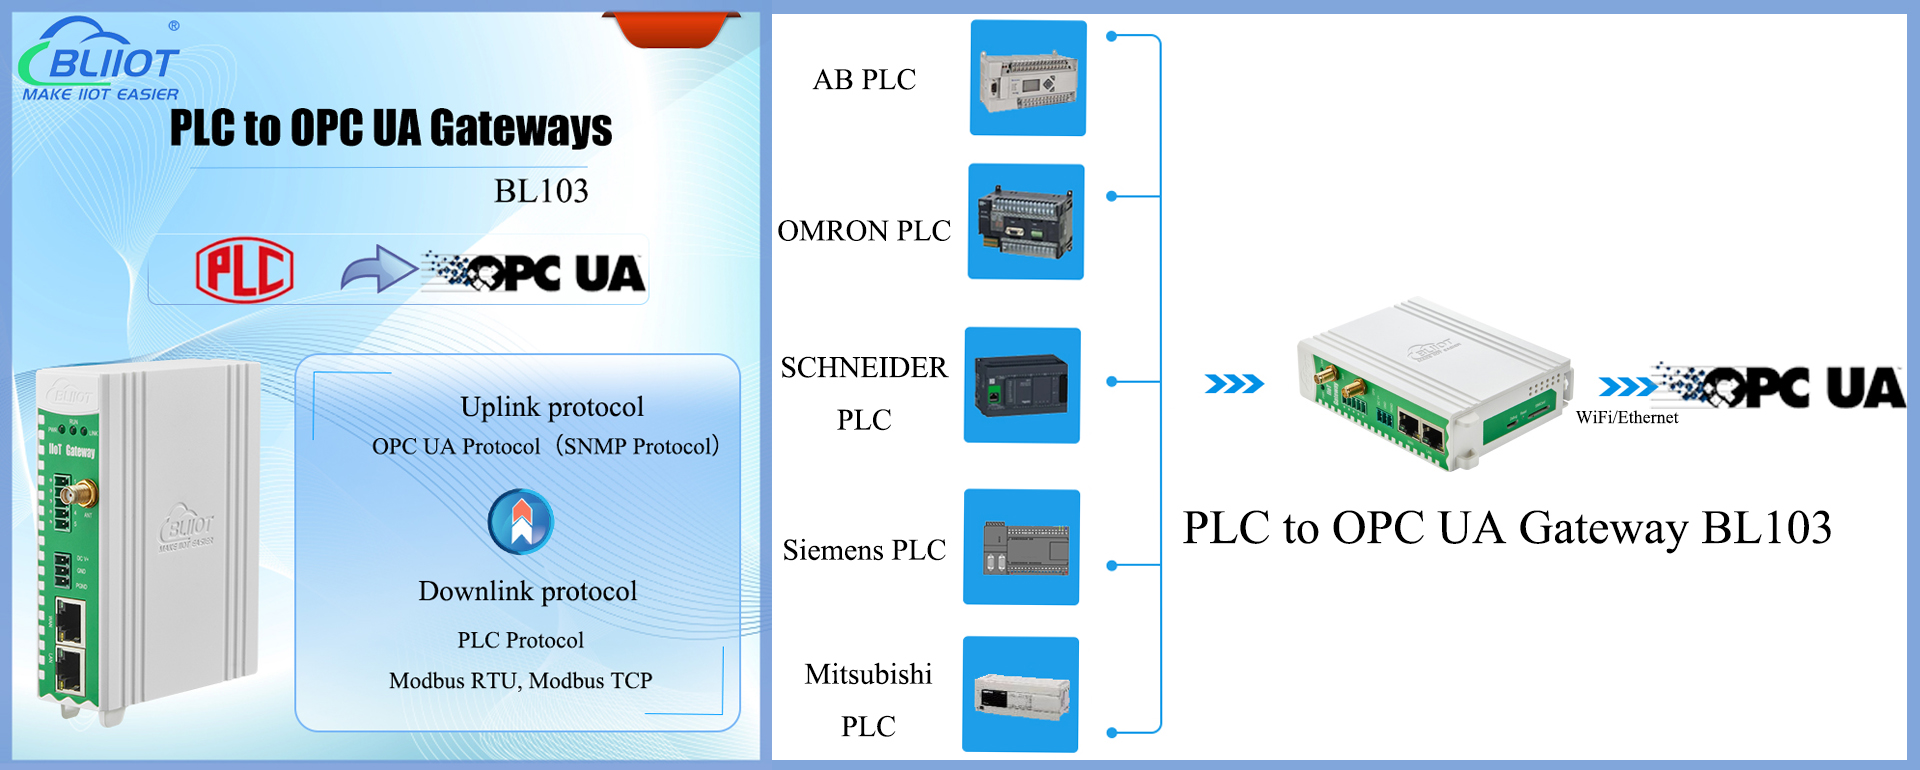 PLC Gateway BL103 Easily Converts PLC to OPC UA to Support Industry 4.0